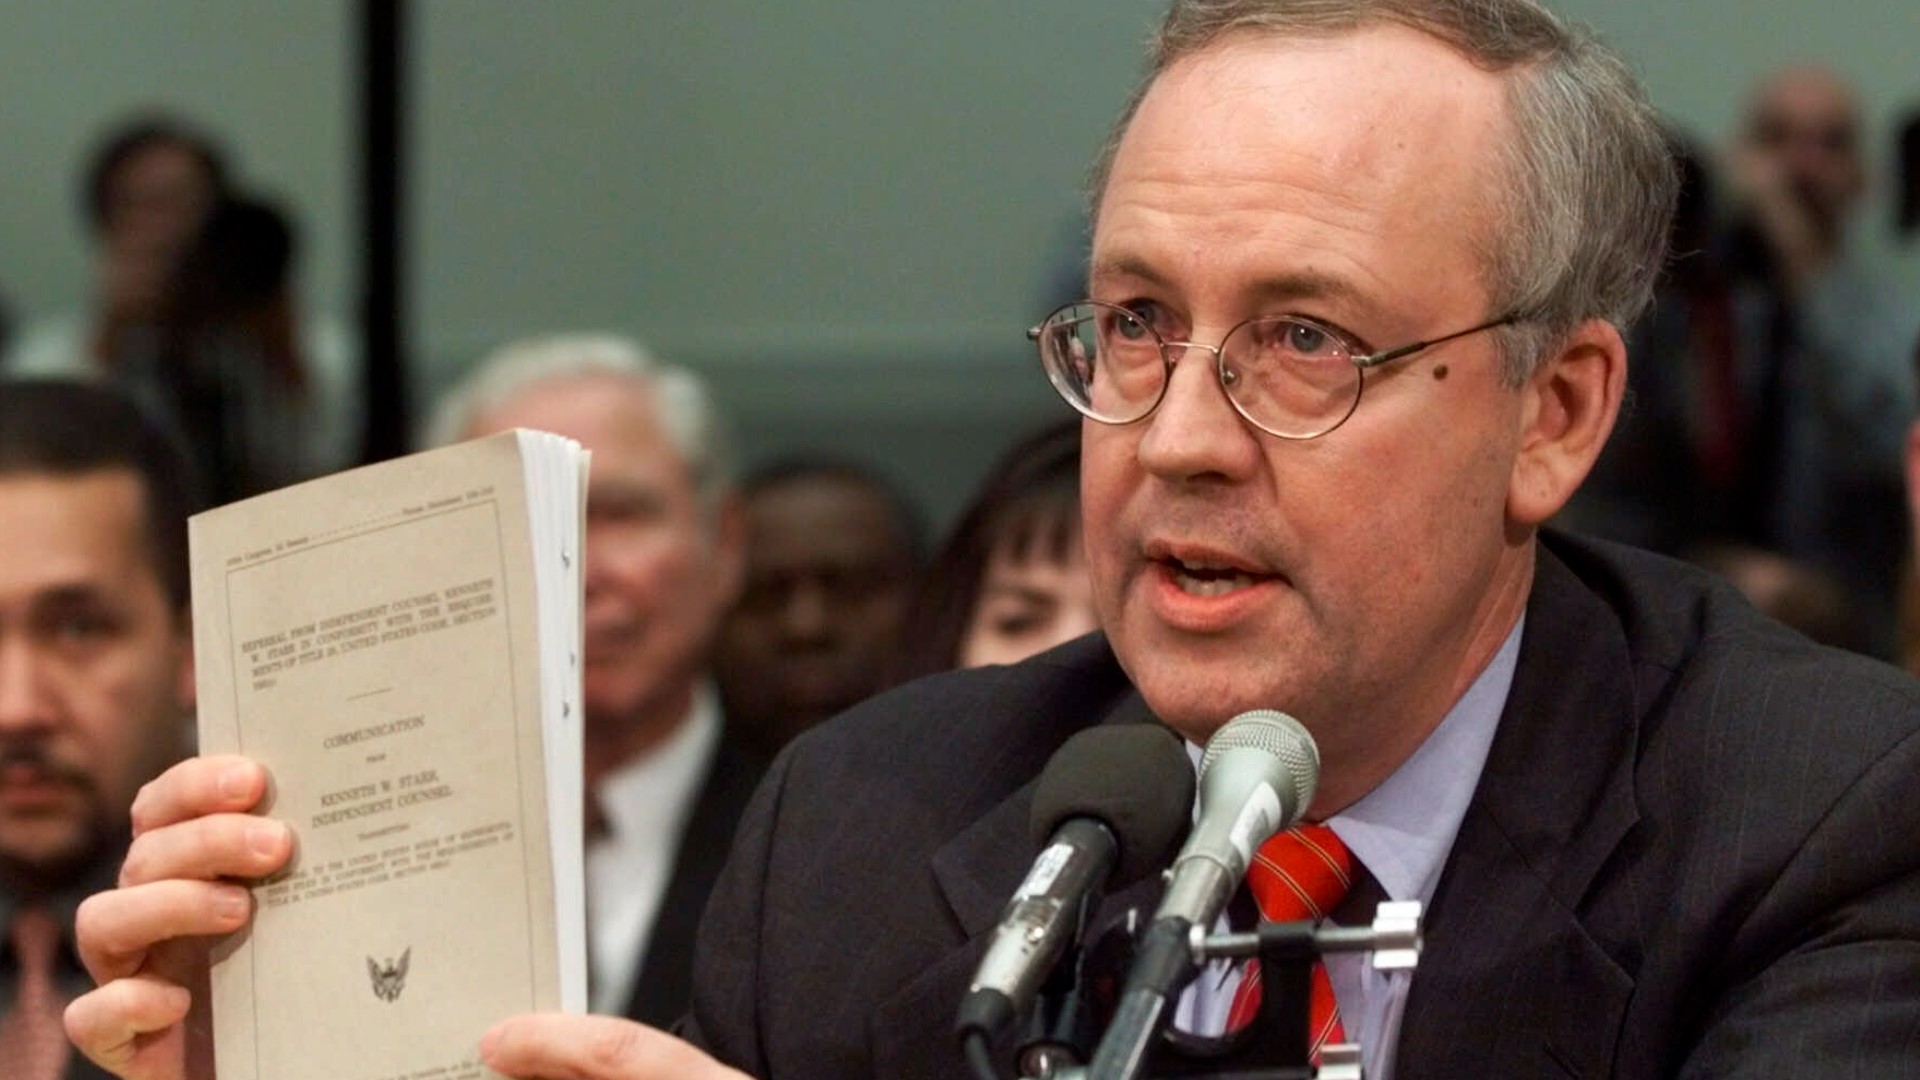 The Associated Press is reporting that Whitewater special prosecutor Kenneth Starr has died at age 76 due to surgery complications.